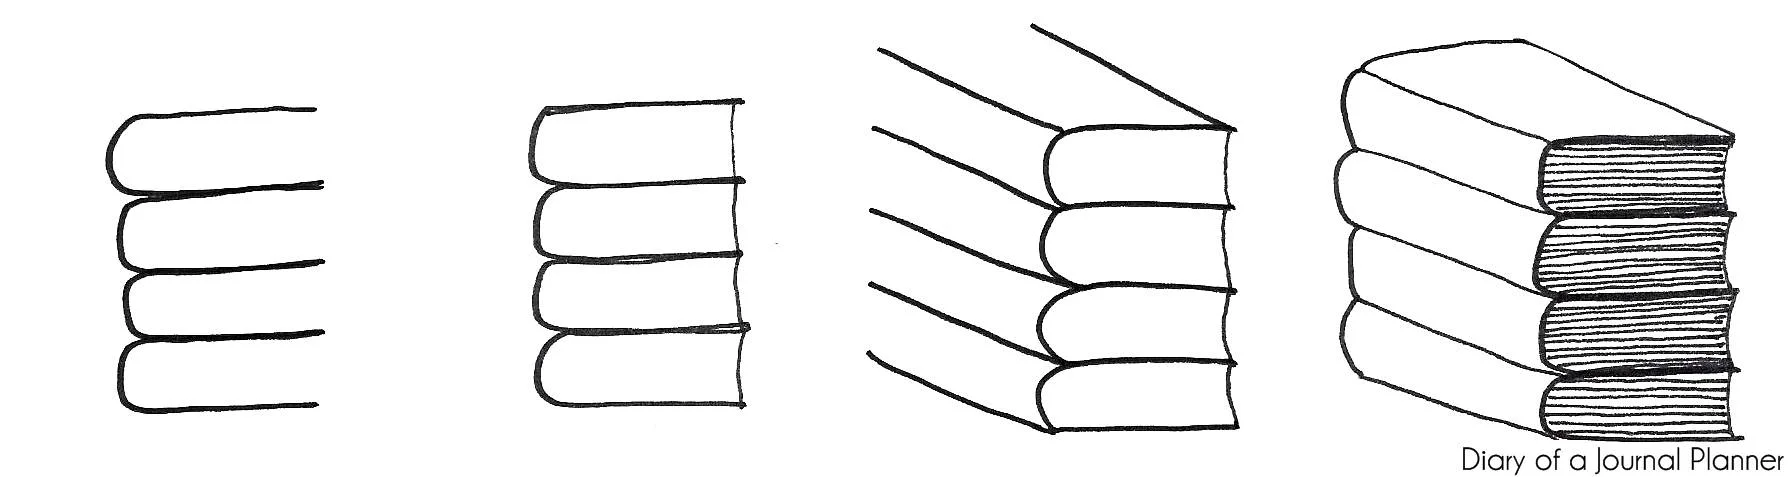 Stacked Books PNG Picture, Sketch Vintage Books Stacked Pencil Drawing,  Sketch, Book, Vintage PNG Image For Free Download | Pencil drawing images,  Beautiful pencil drawings, Landscape pencil drawings